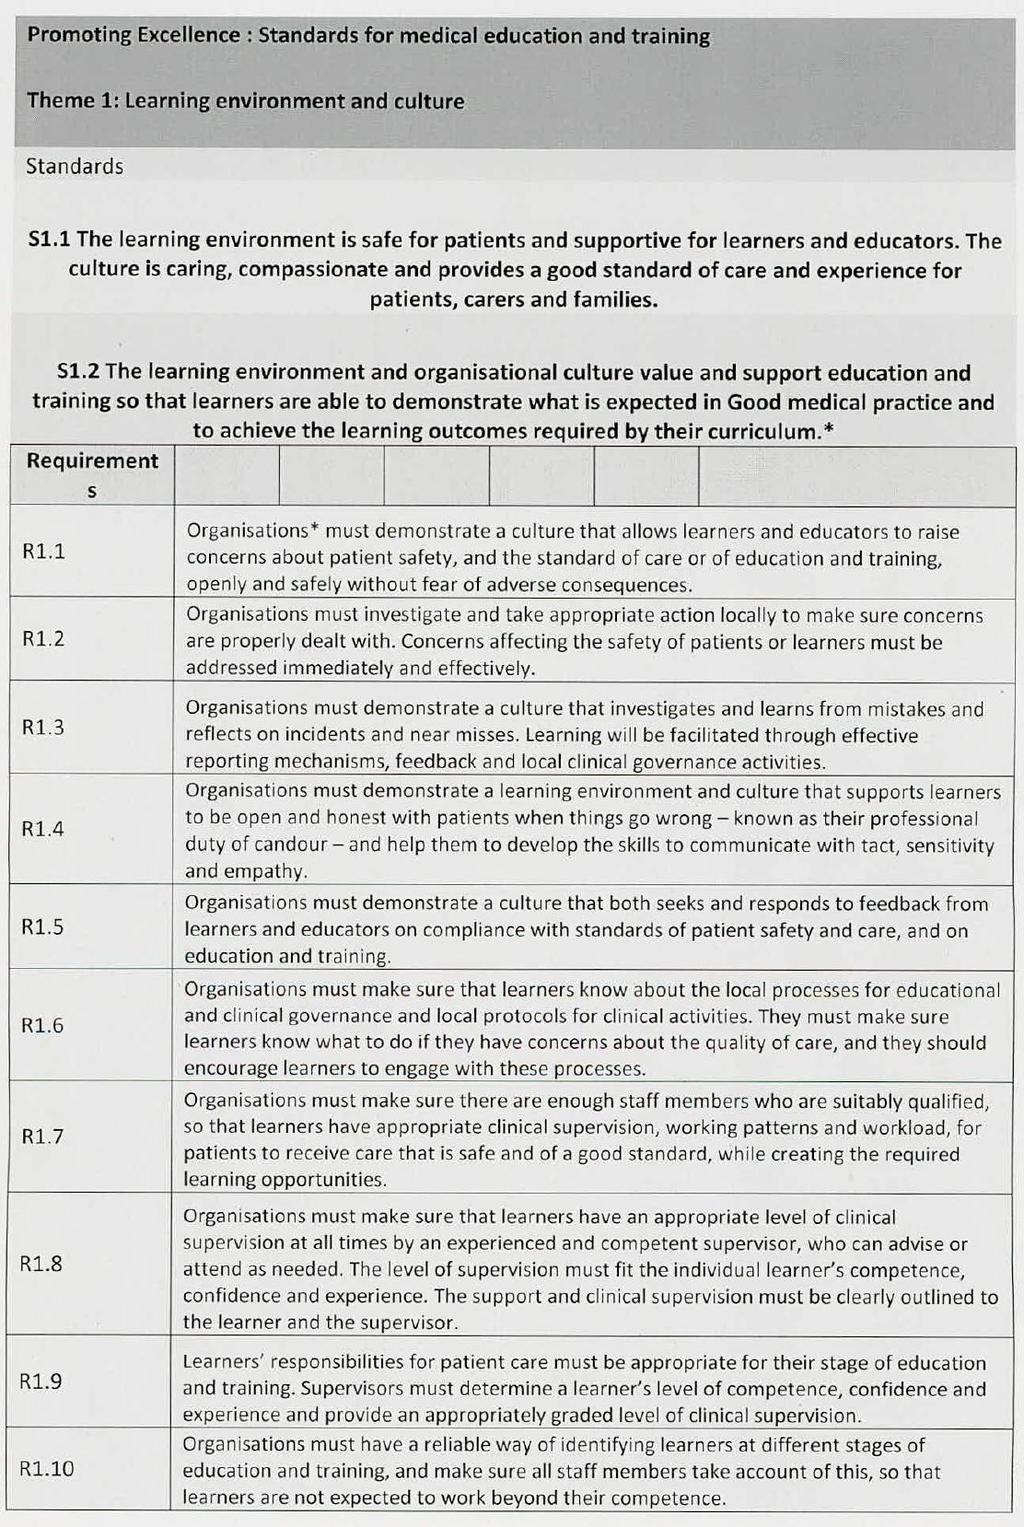 Appendix 2: Promoting Excellence: Standards